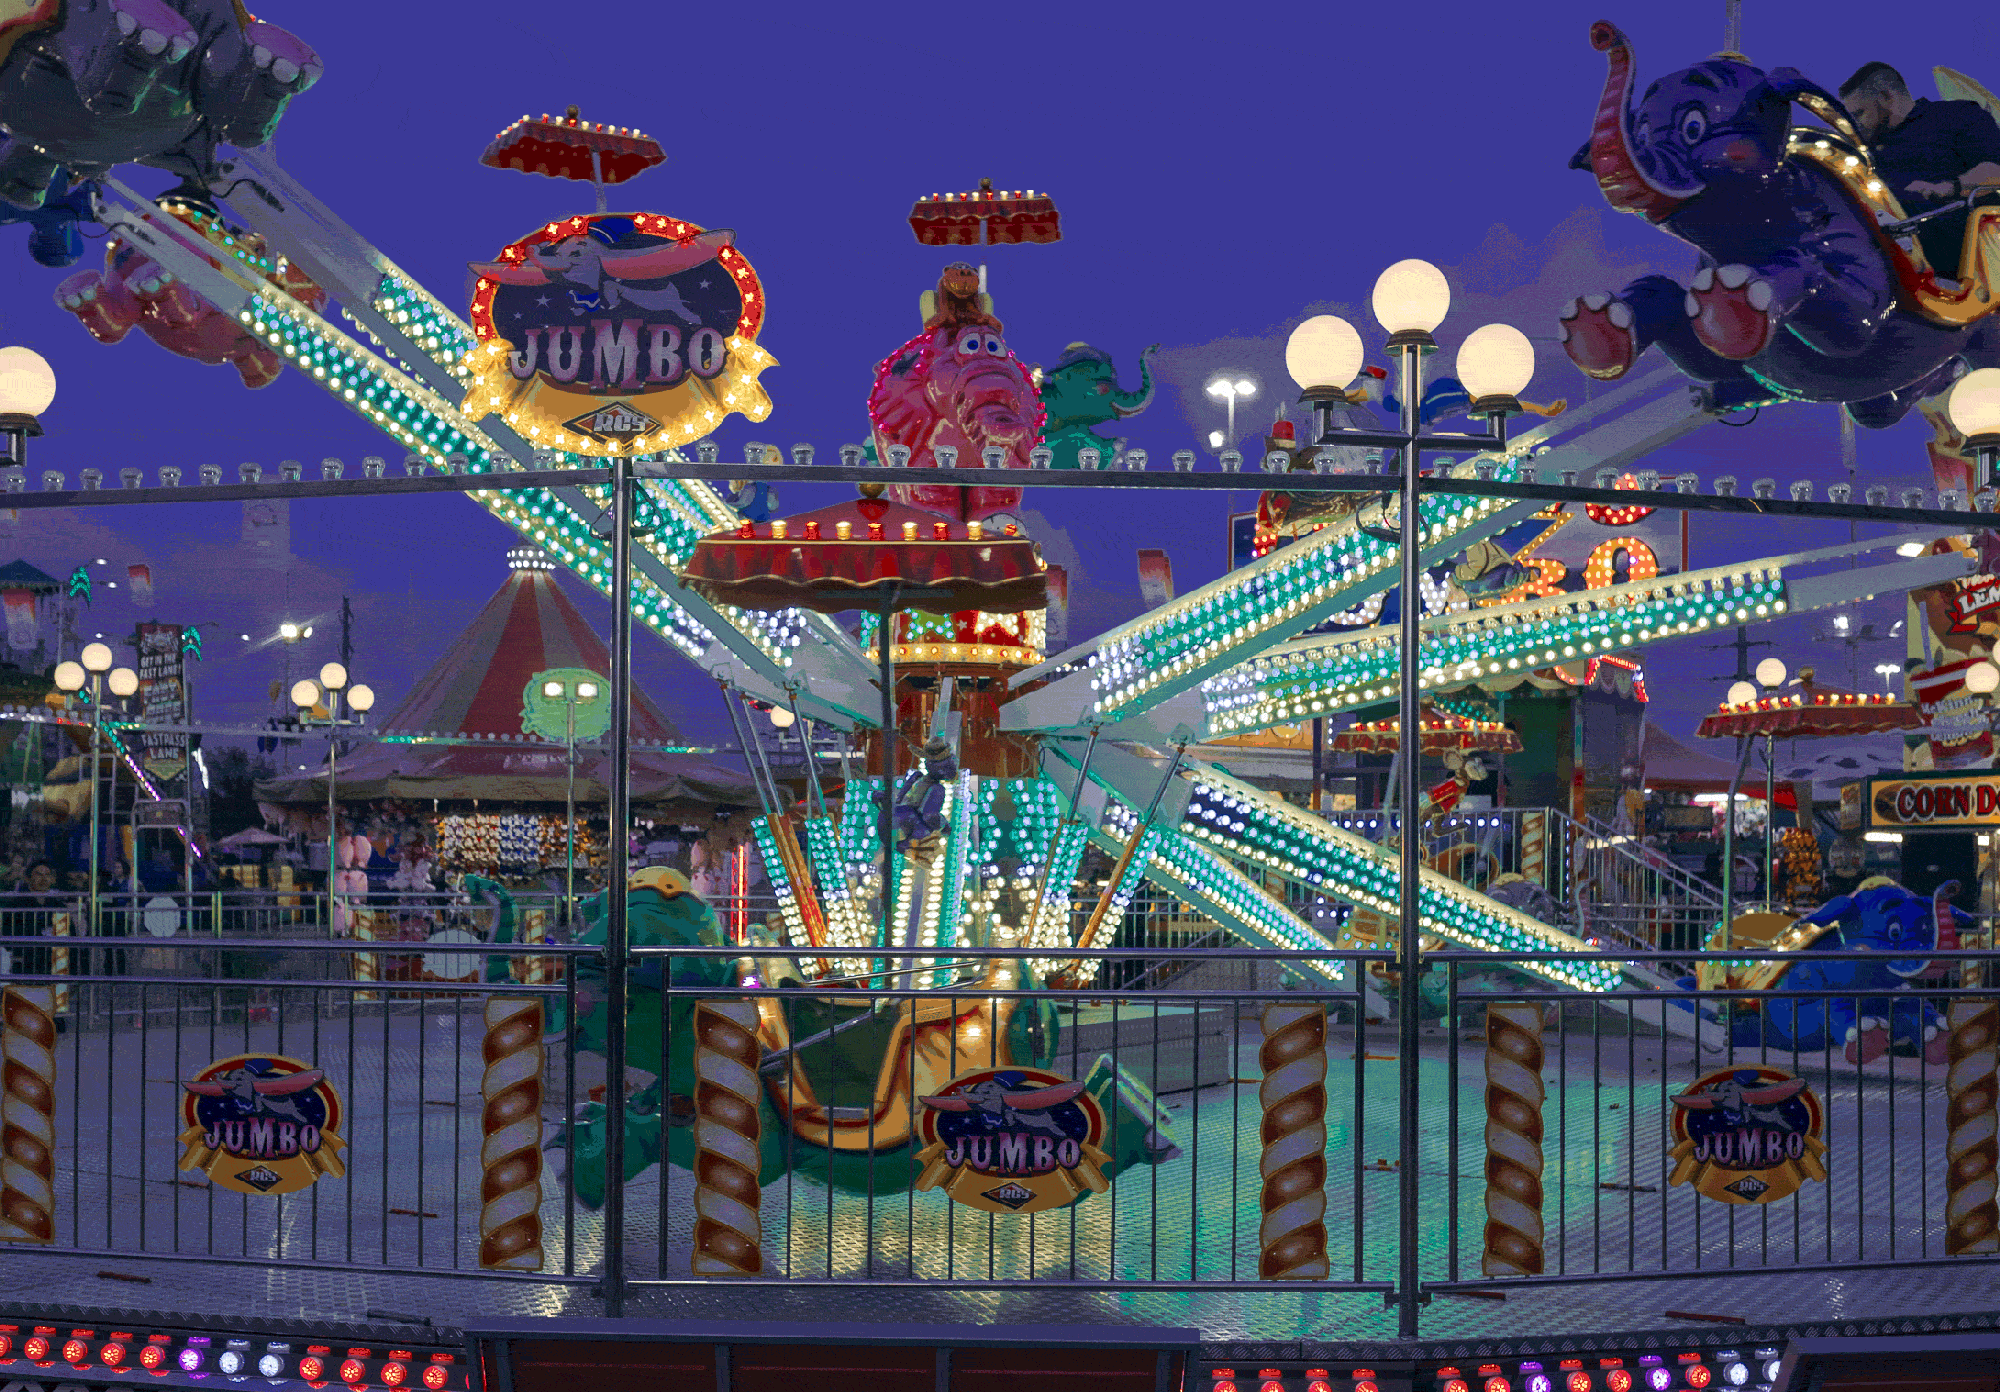 A carnival ride at the Houston Livestock Show & Rodeo in Houston, Texas, photographed by Todd Spoth.